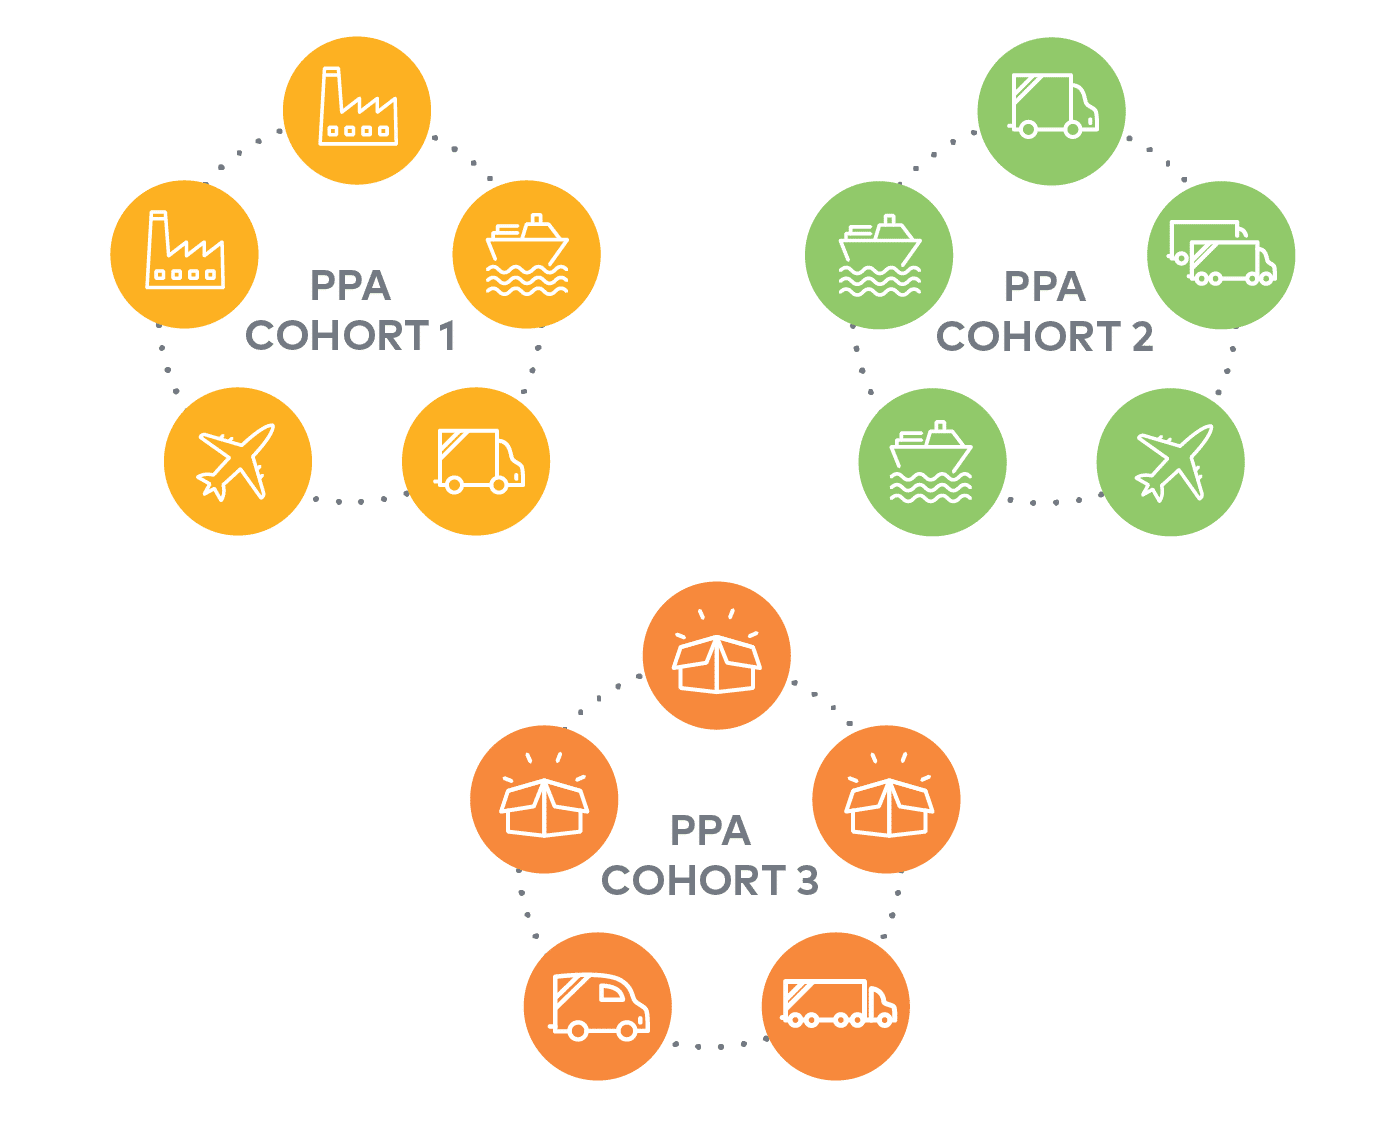 Depiction of PPA cohorts in a supplier PPA aggregation.